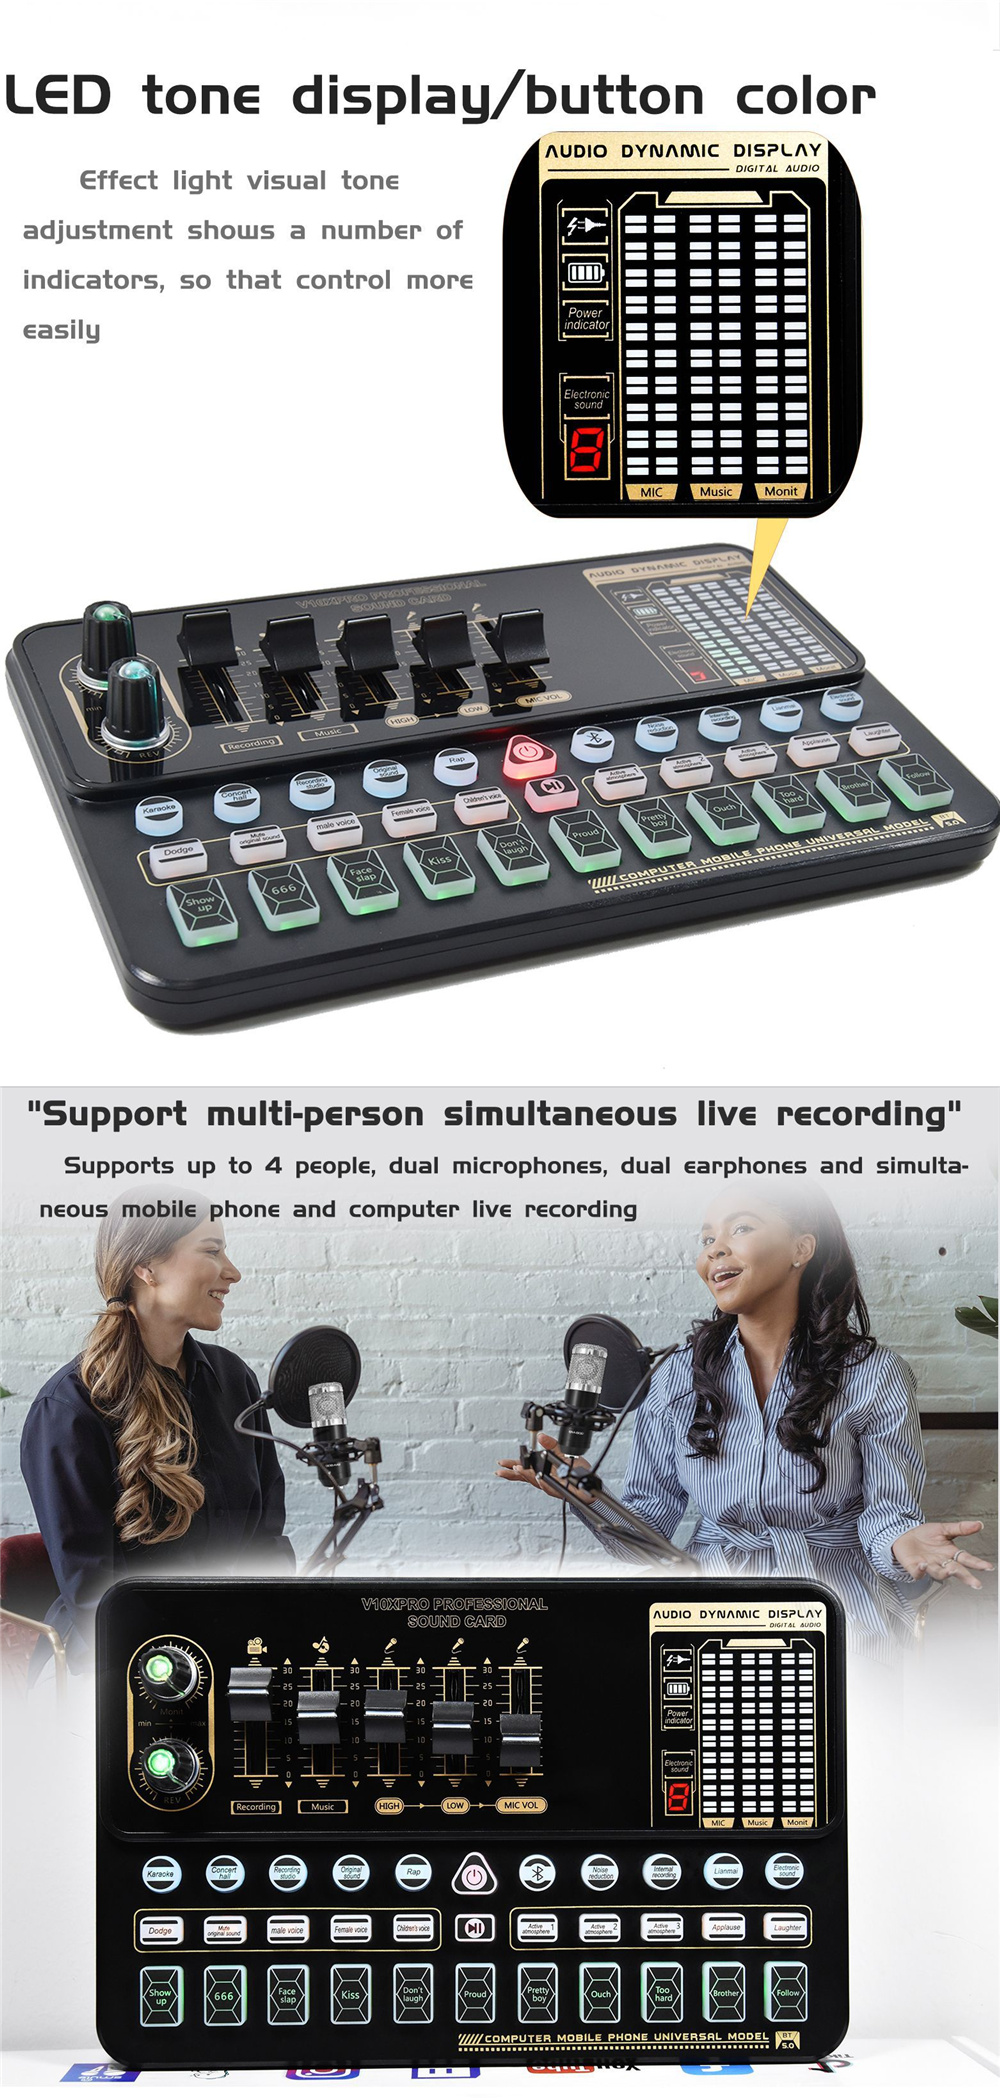 BM800 Condenser Microphone Kit Pro Audio Studio Sound Recording Microphone with V10X PRO Muti-functional Bluetooth Sound Card